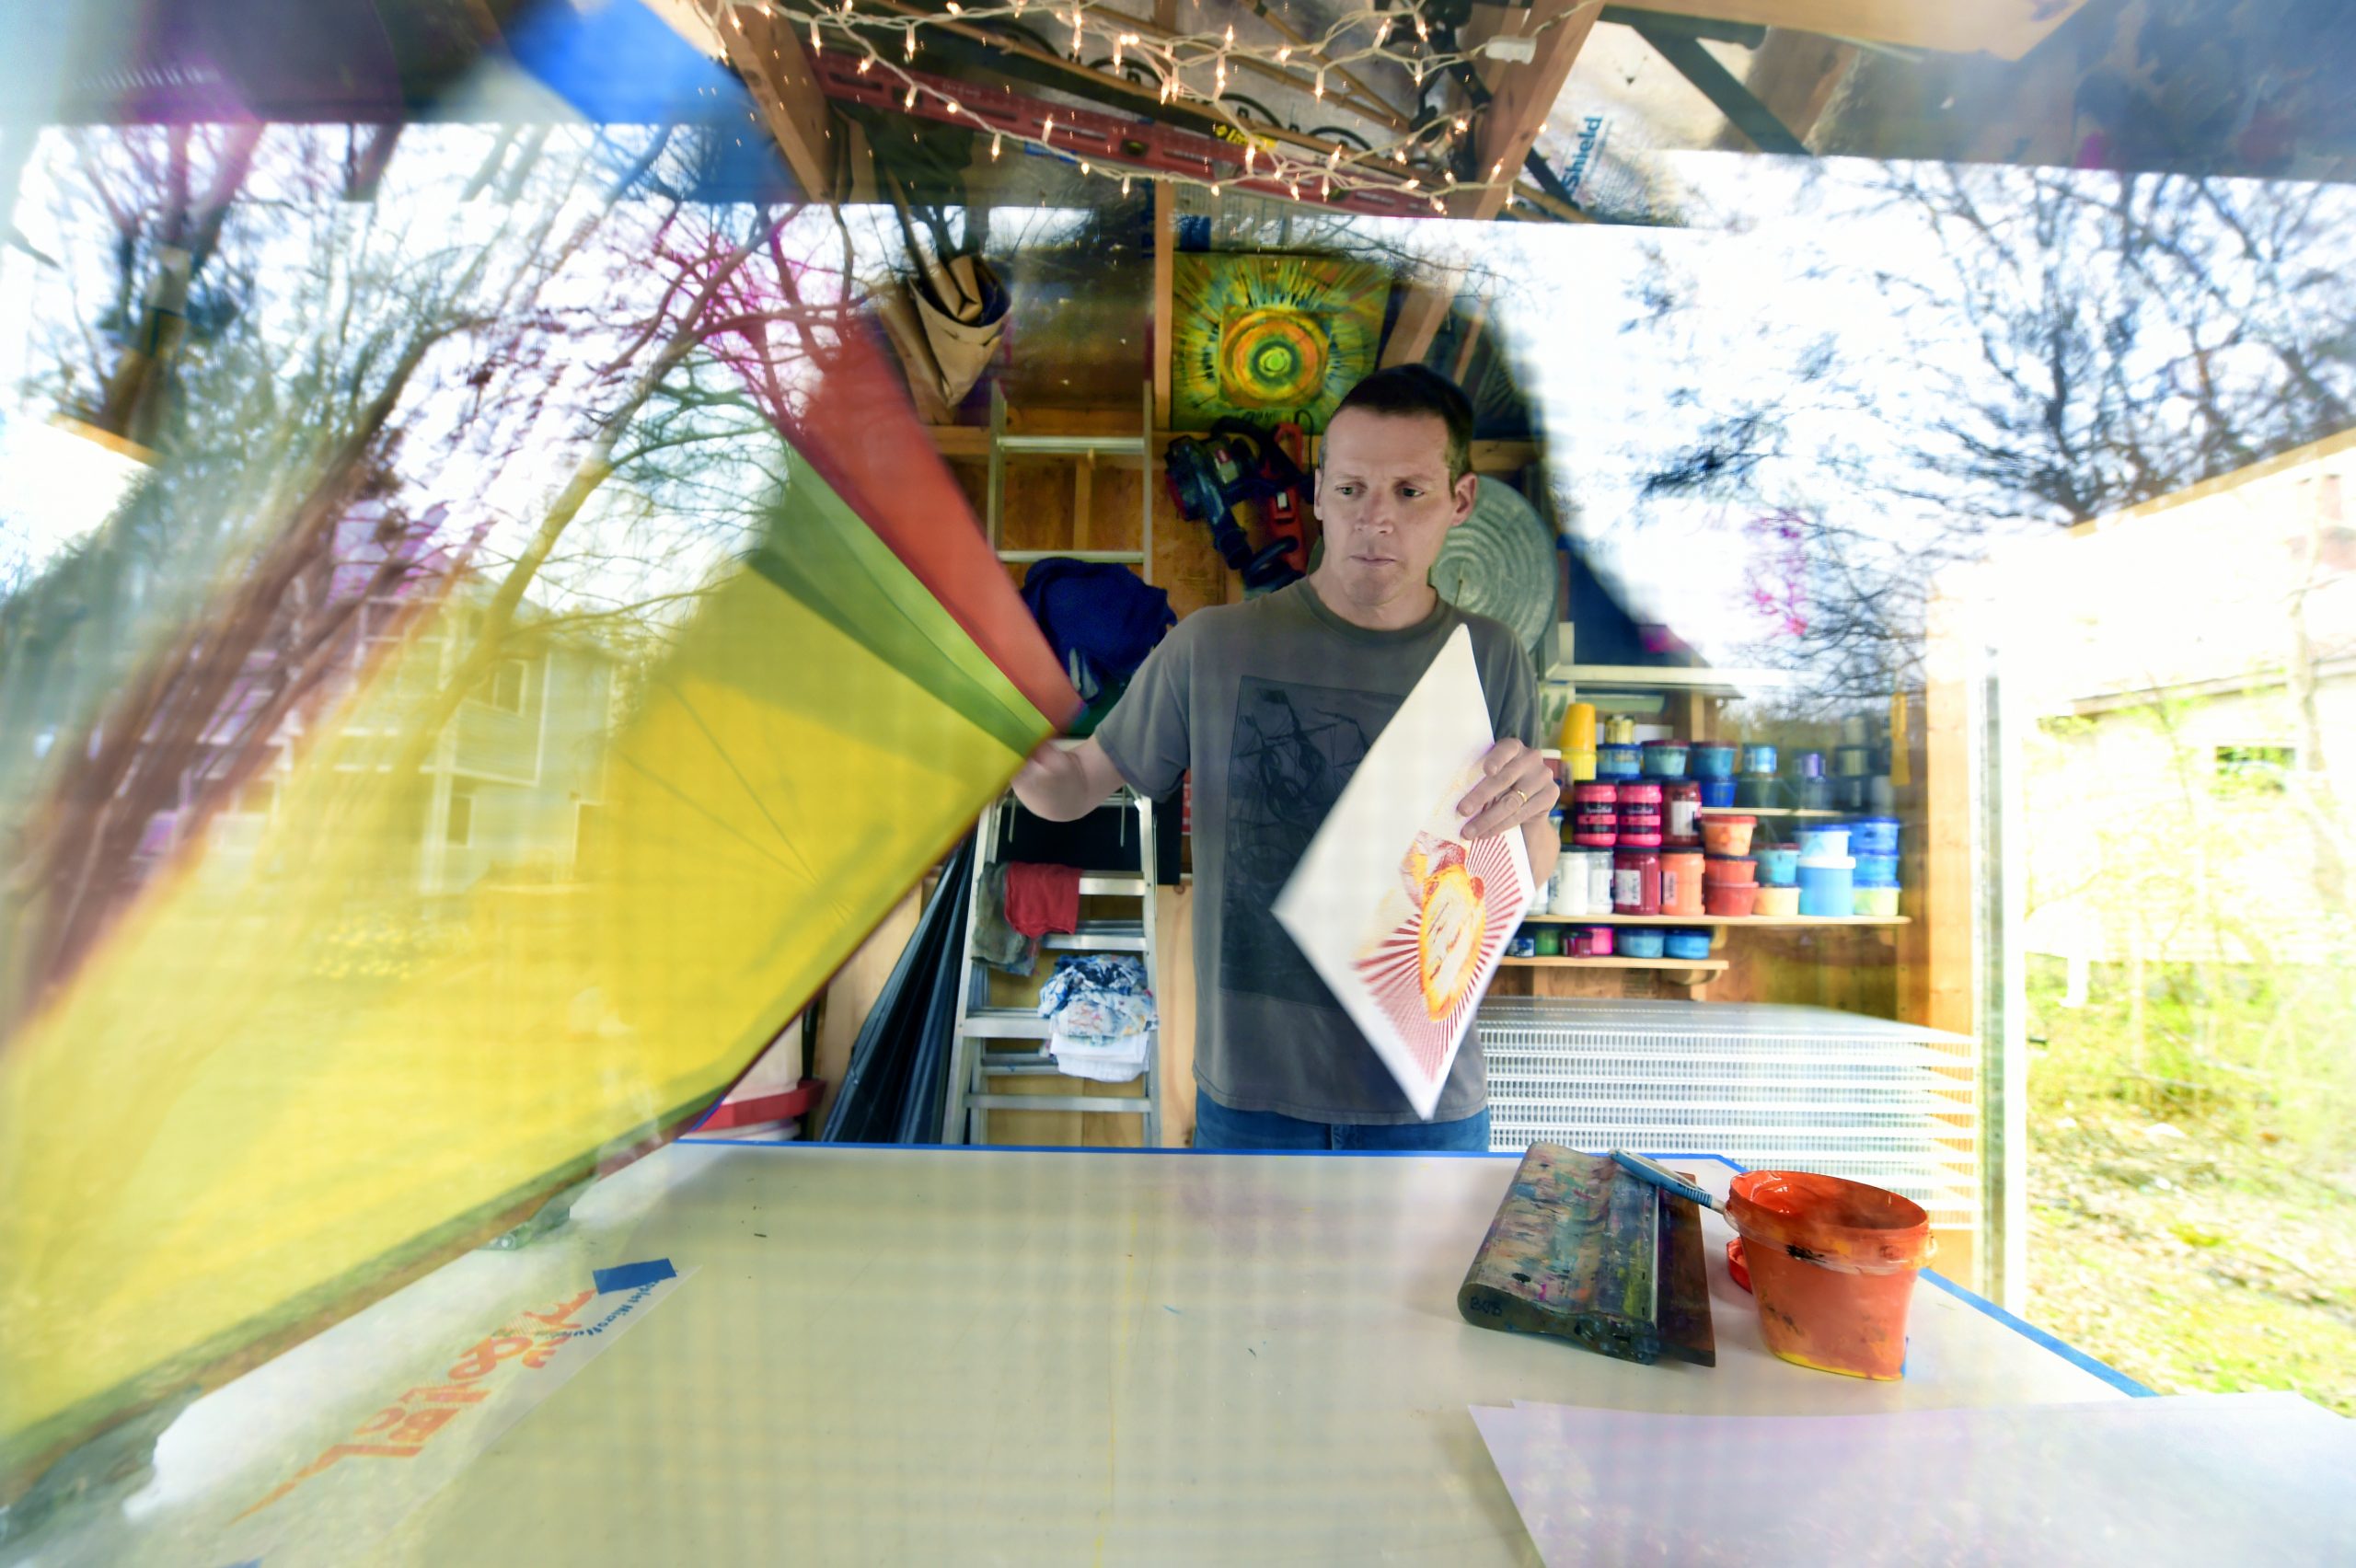 Bob Goldstein lifts the lid on a screen printer as he he is surrounded by bright colors in his shed where he does his art.